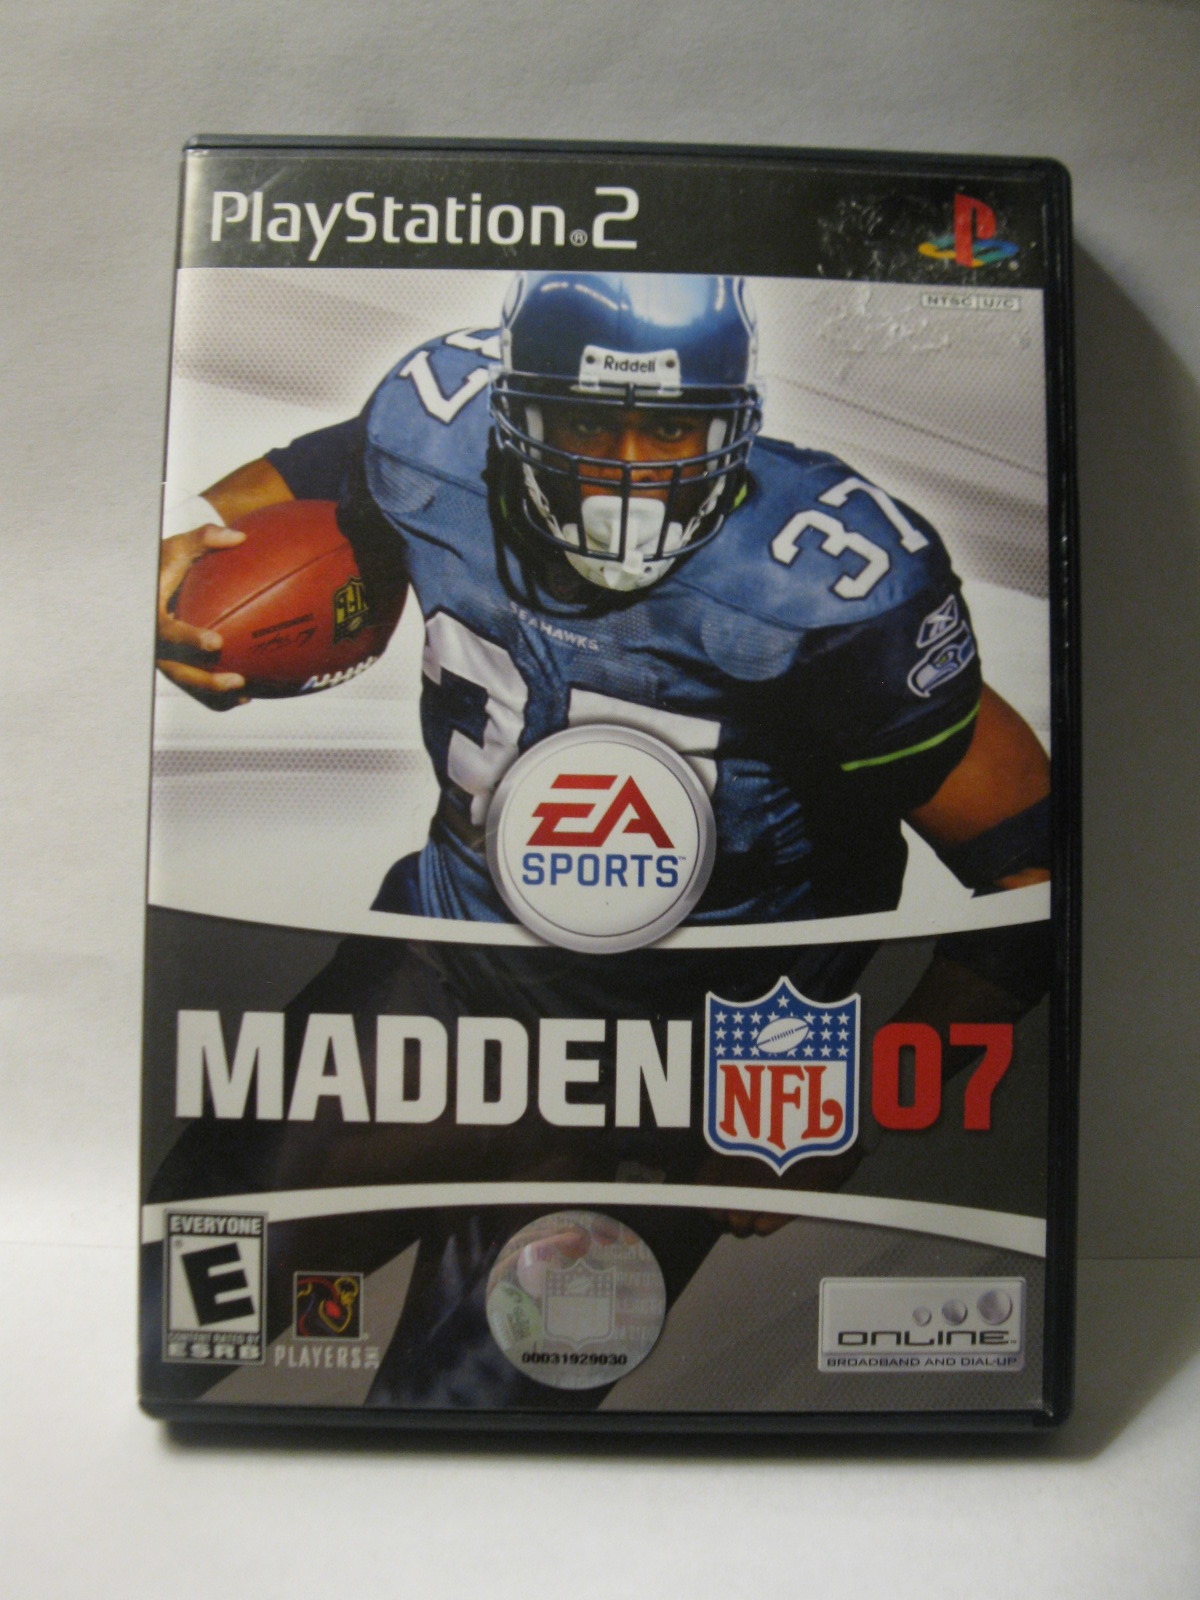 Primary image for Playstation 2 / PS2 video game: Madden NFL 07